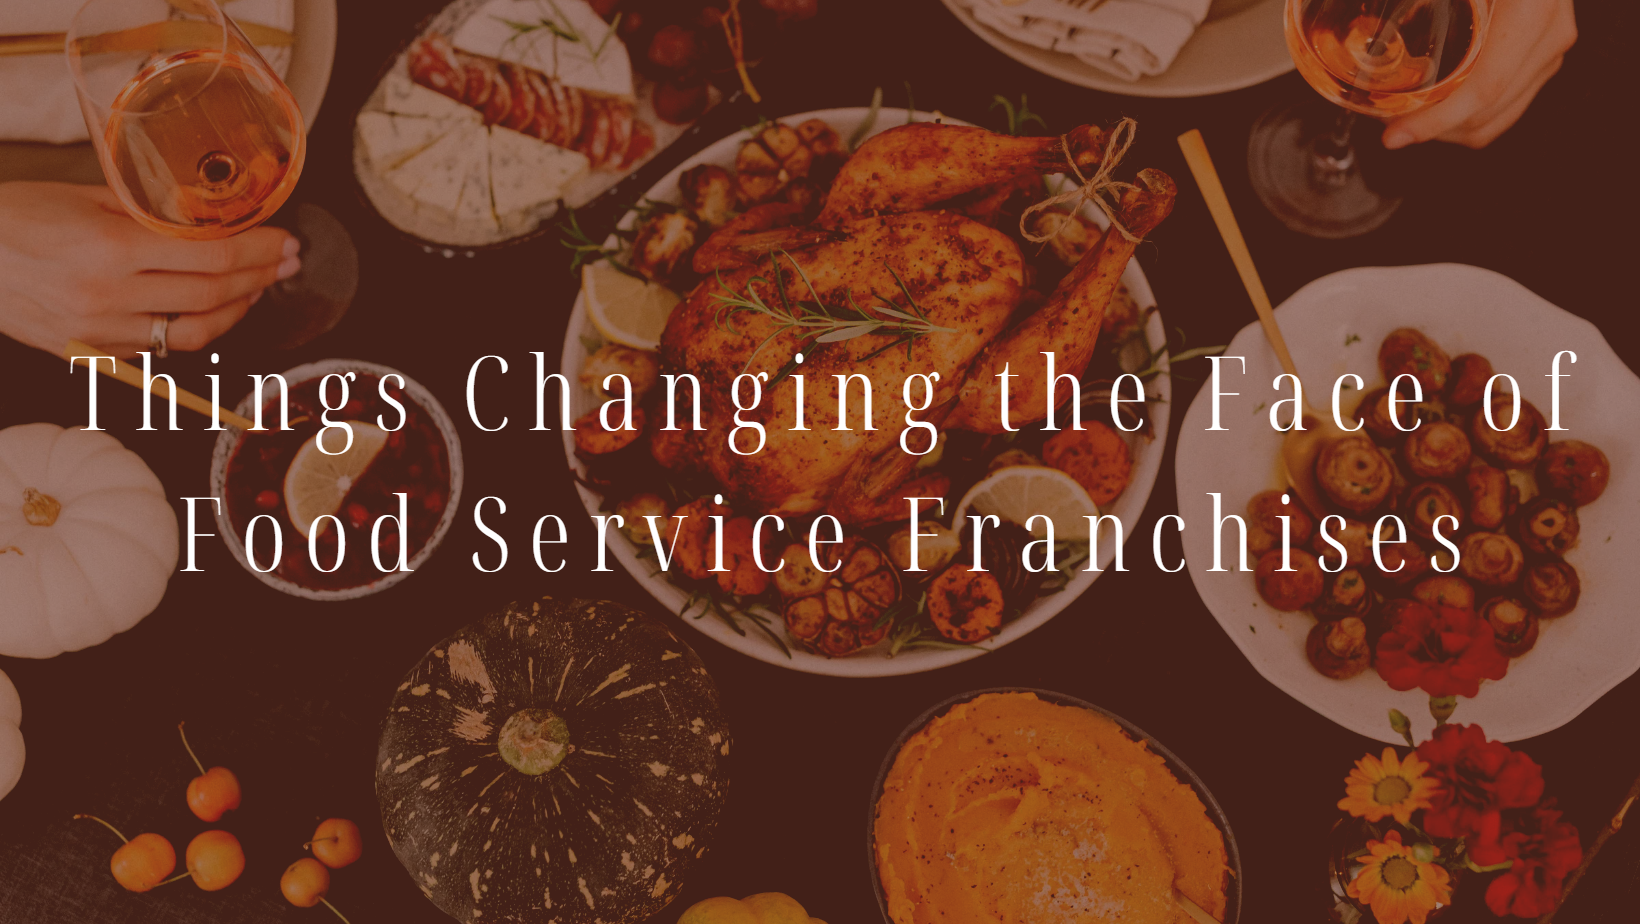 Things Changing the Face of Food Service Franchises